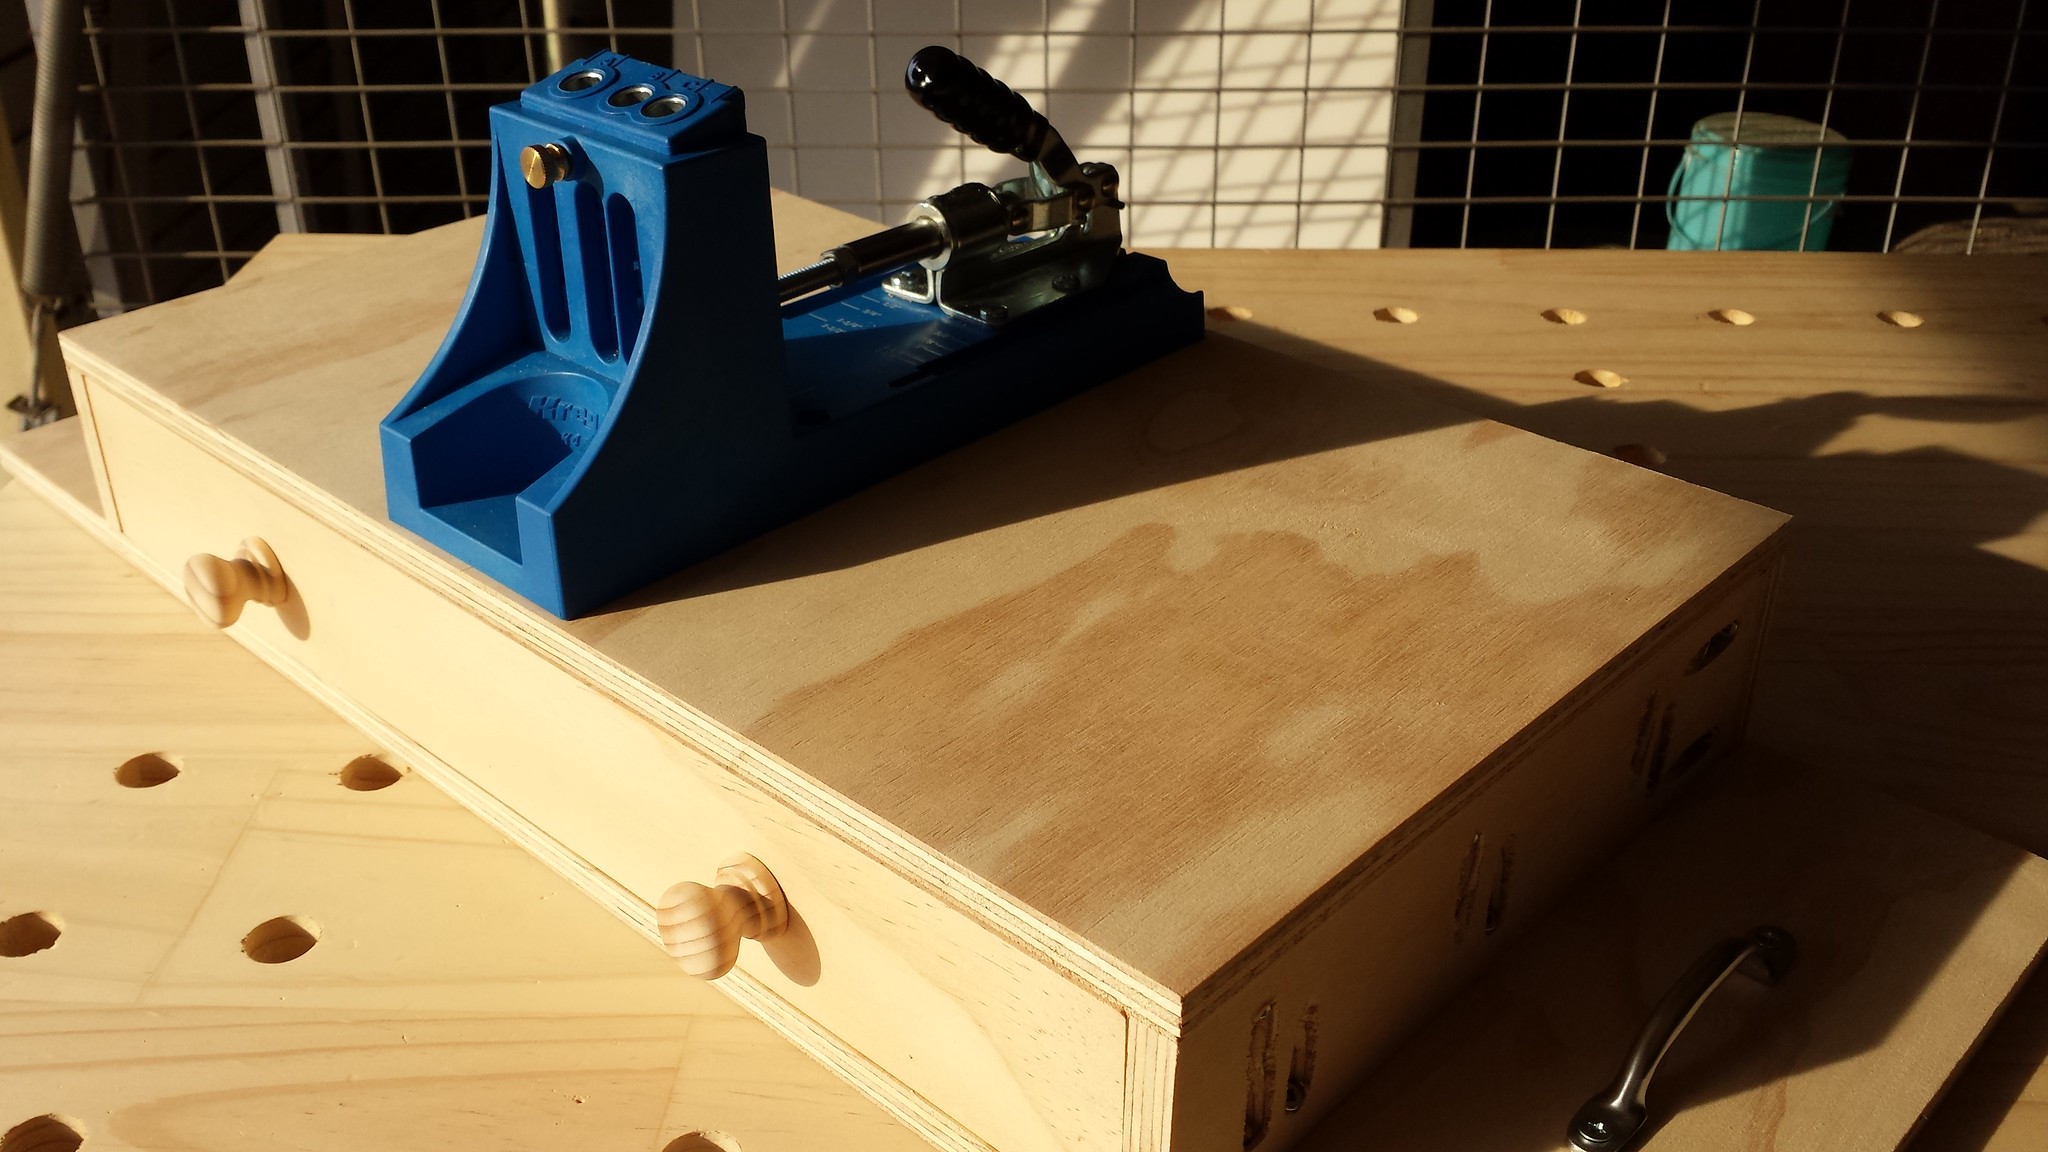 How to Use a Kreg Jig – 6 Steps to a Productive Woodworking